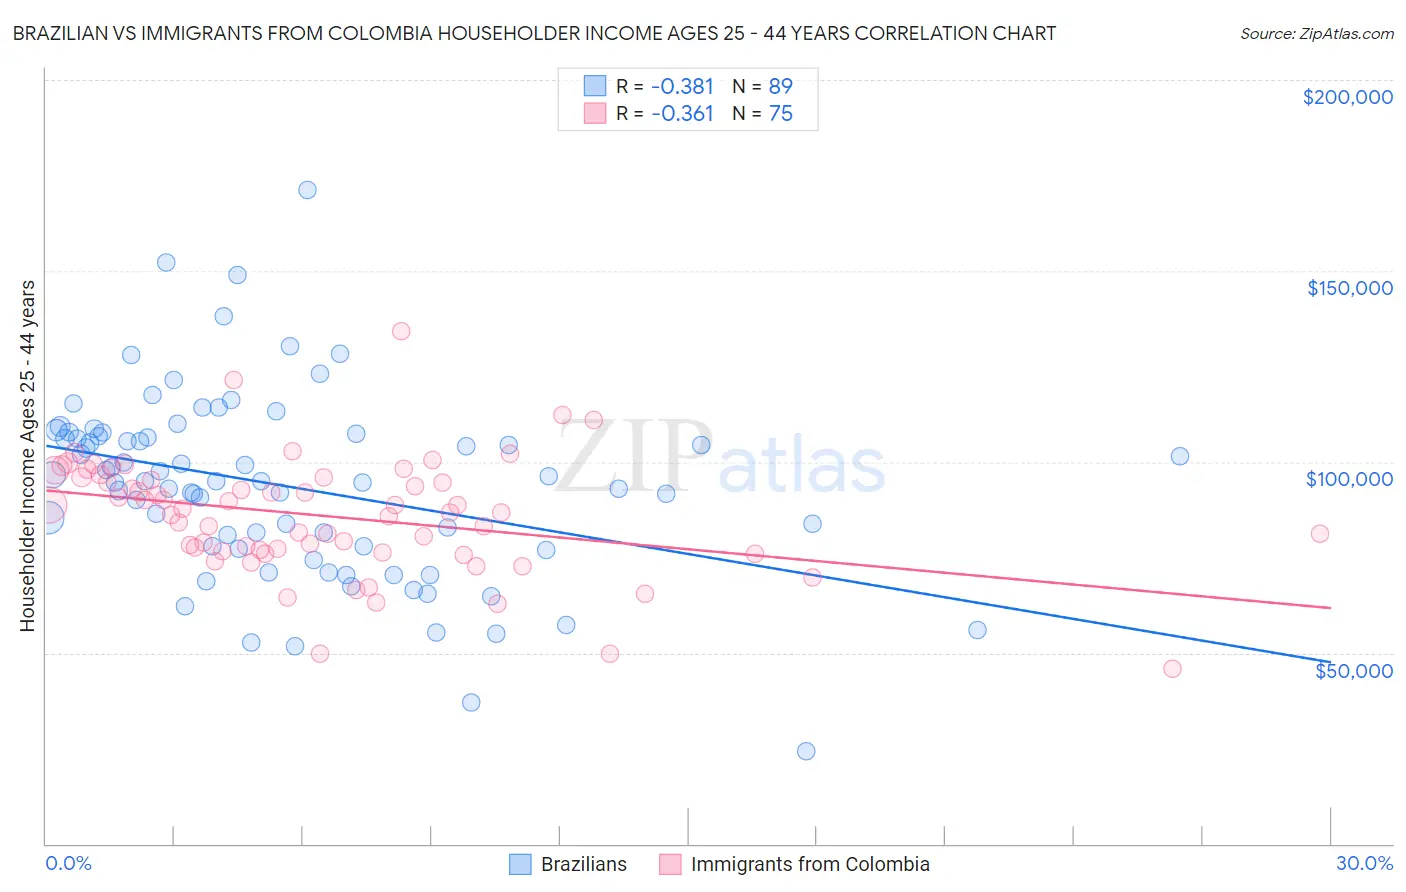 Brazilian vs Immigrants from Colombia Householder Income Ages 25 - 44 years